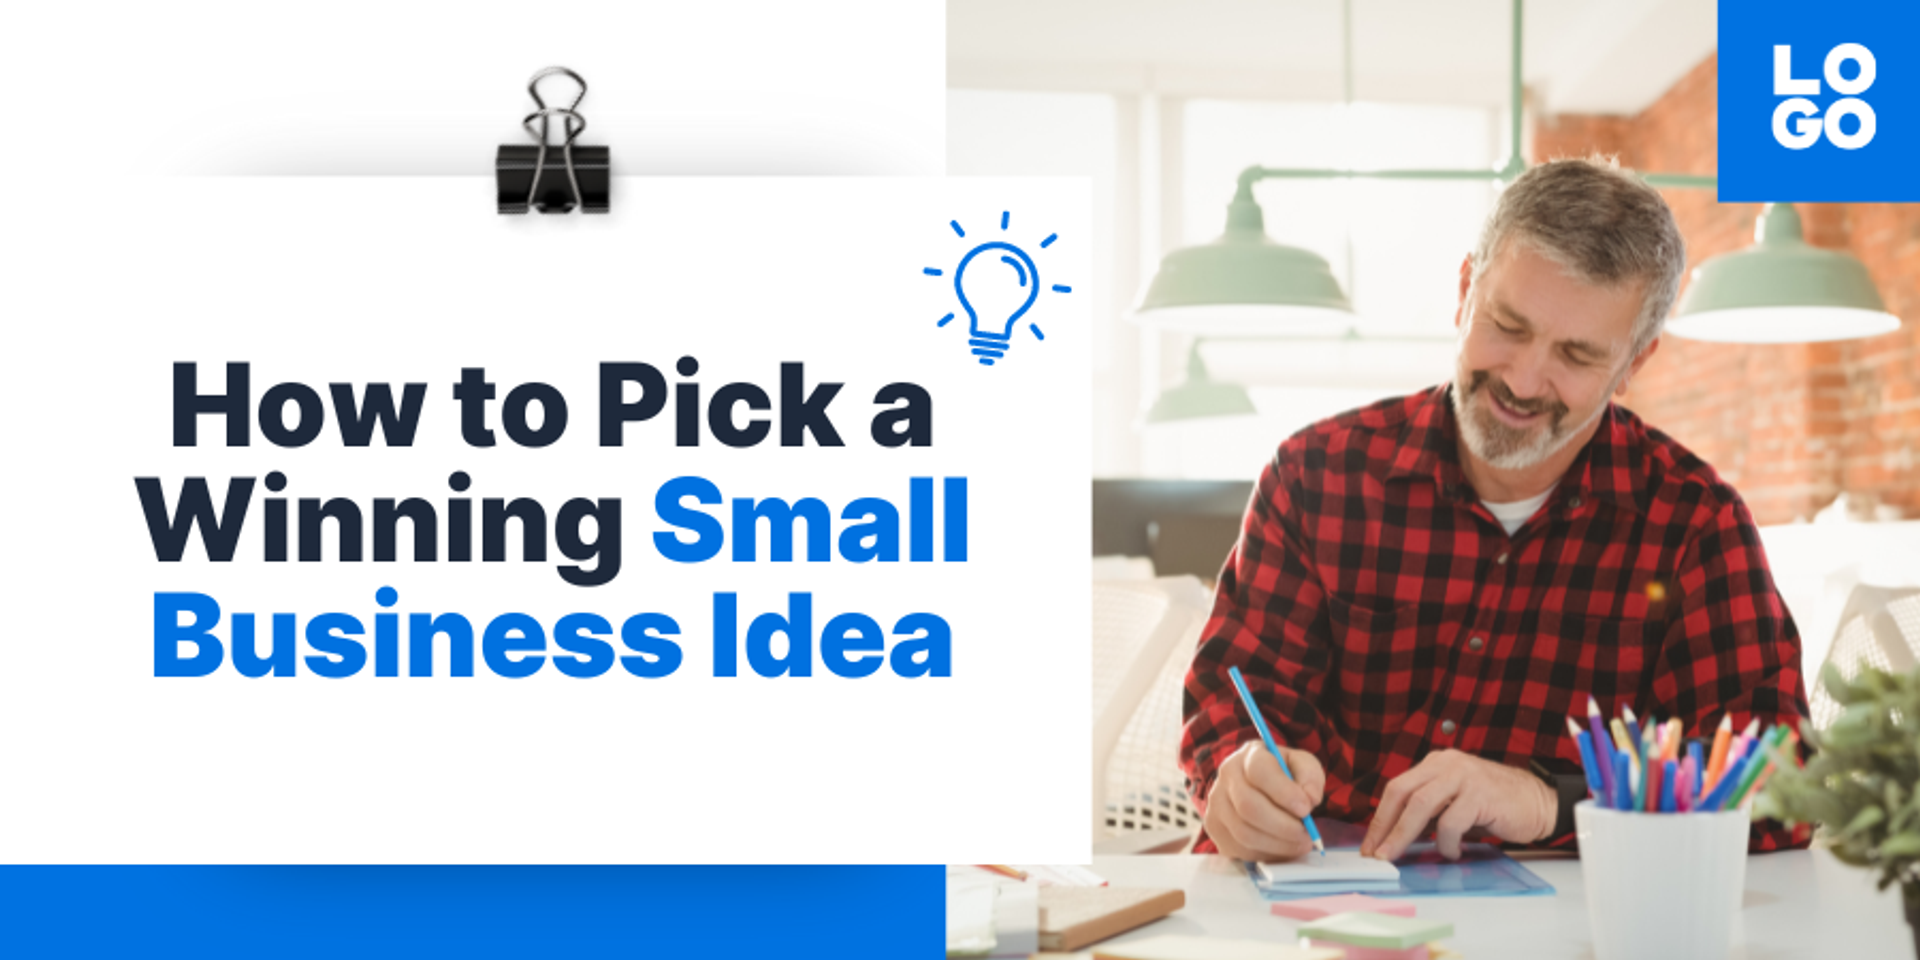 How to Pick a Winning Small Business Idea